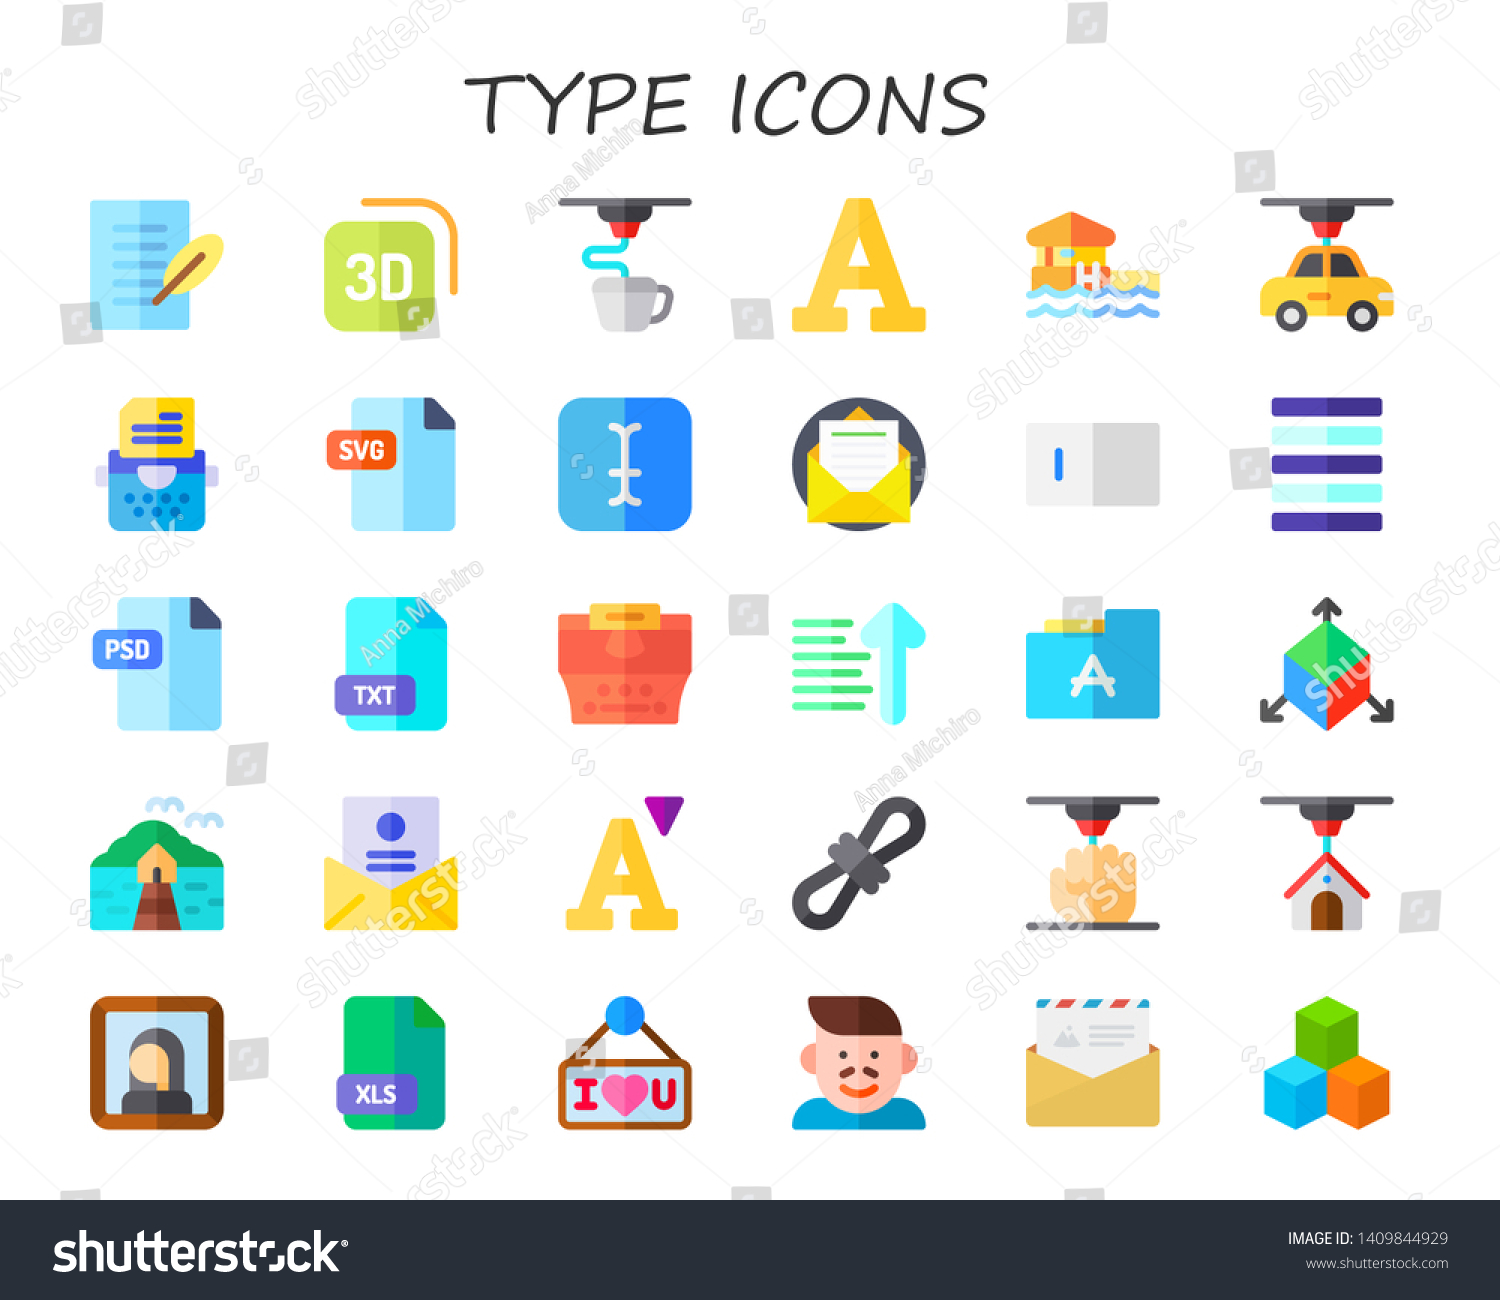 SVG of type icon set. 30 flat type icons.  Simple modern icons about  - letter, d, font, bungalow, typewriter, svg, typing, justify, psd, txt, sort ascending, gioconda, xls, i love you svg